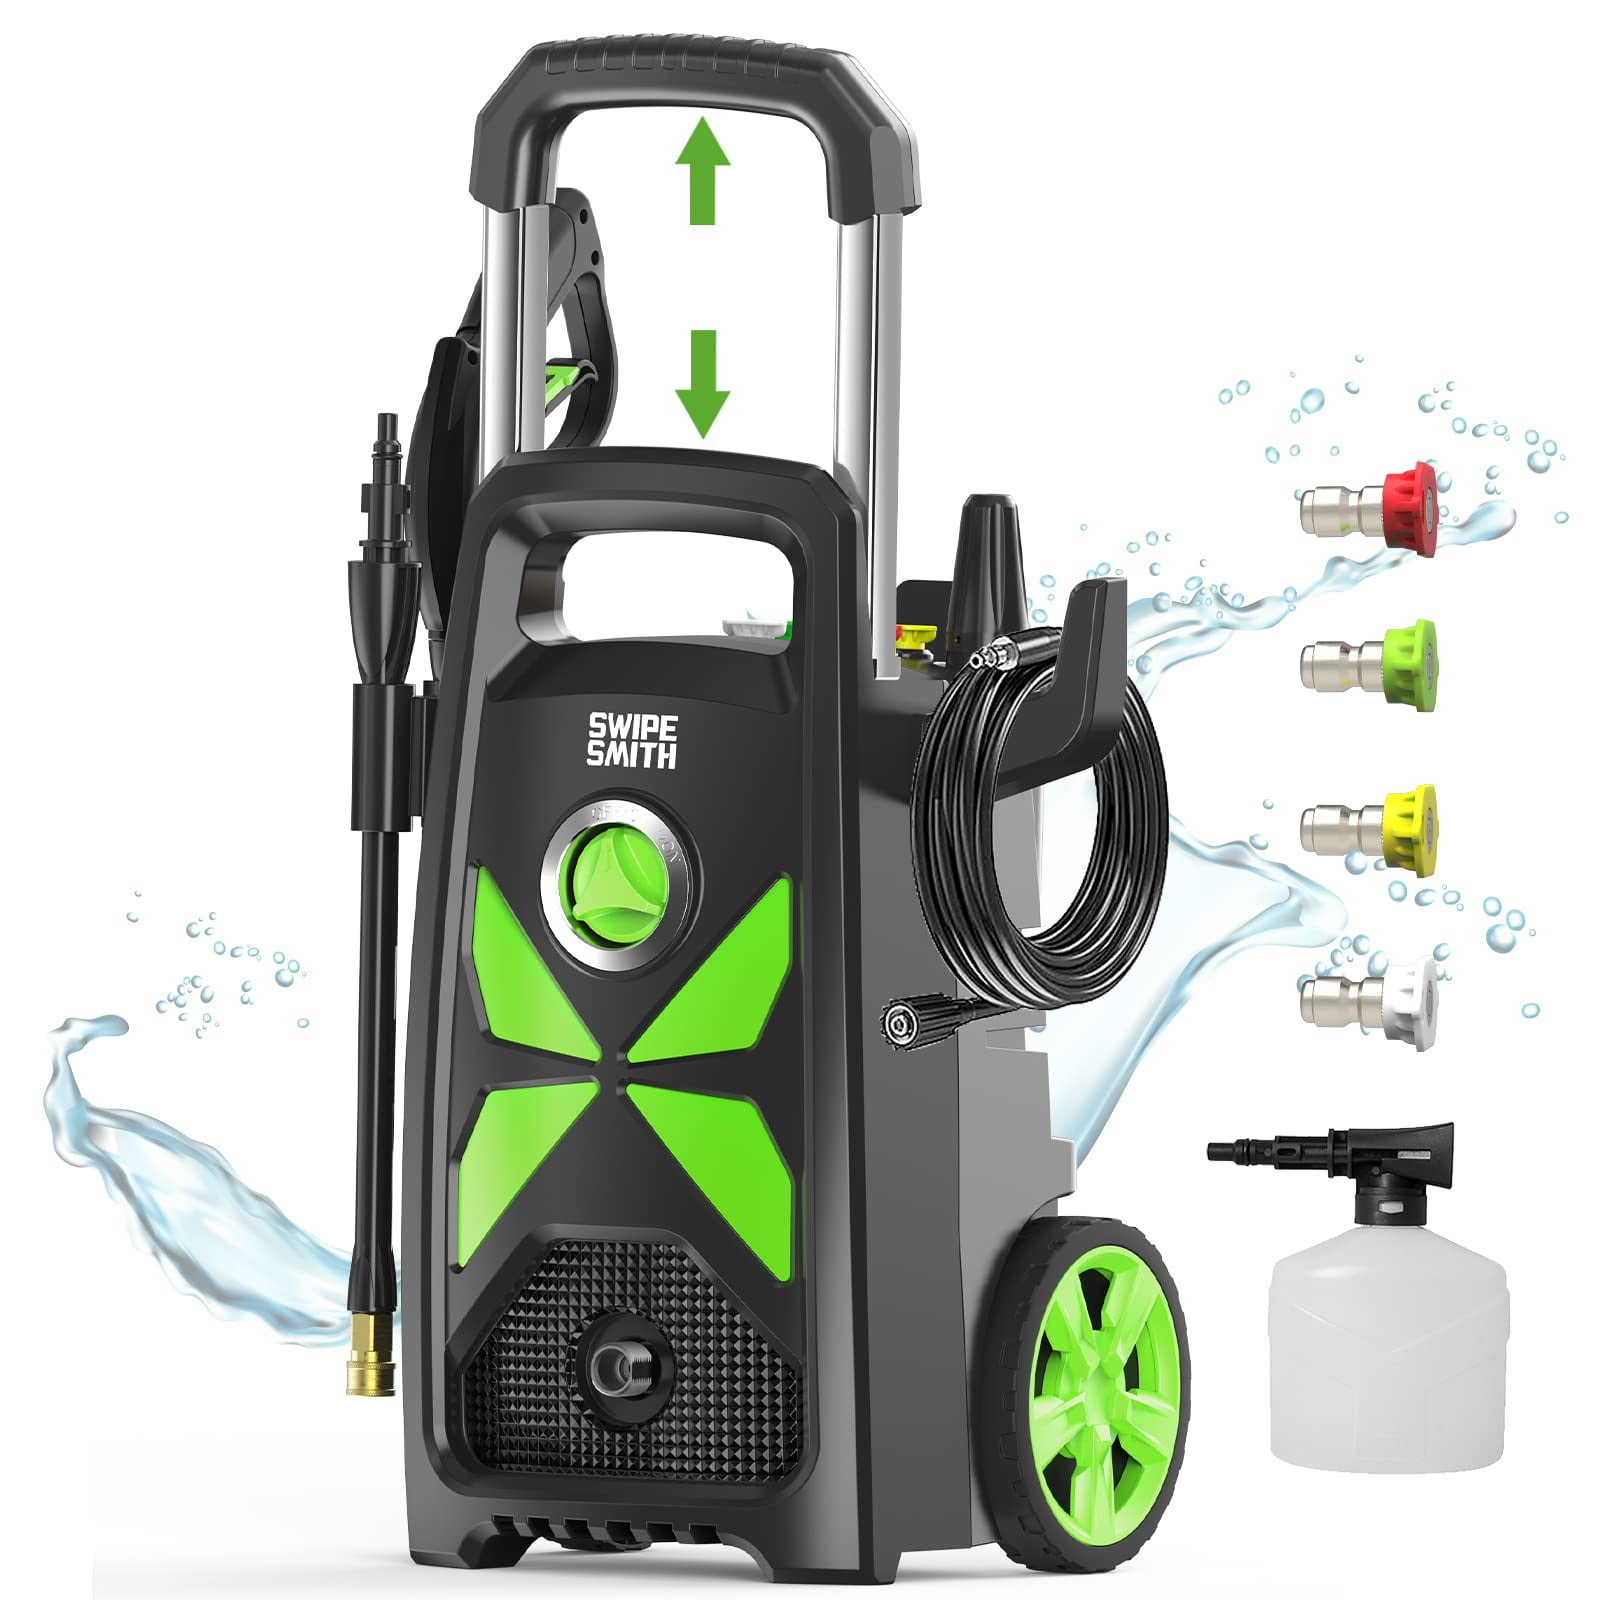 Fengrong Electric Pressure Washer - Power Washers Electric Powered 3500 PSI  High Pressure + 2.6 GPM with Adjustable Spray Nozzle Foam Cannon, Car